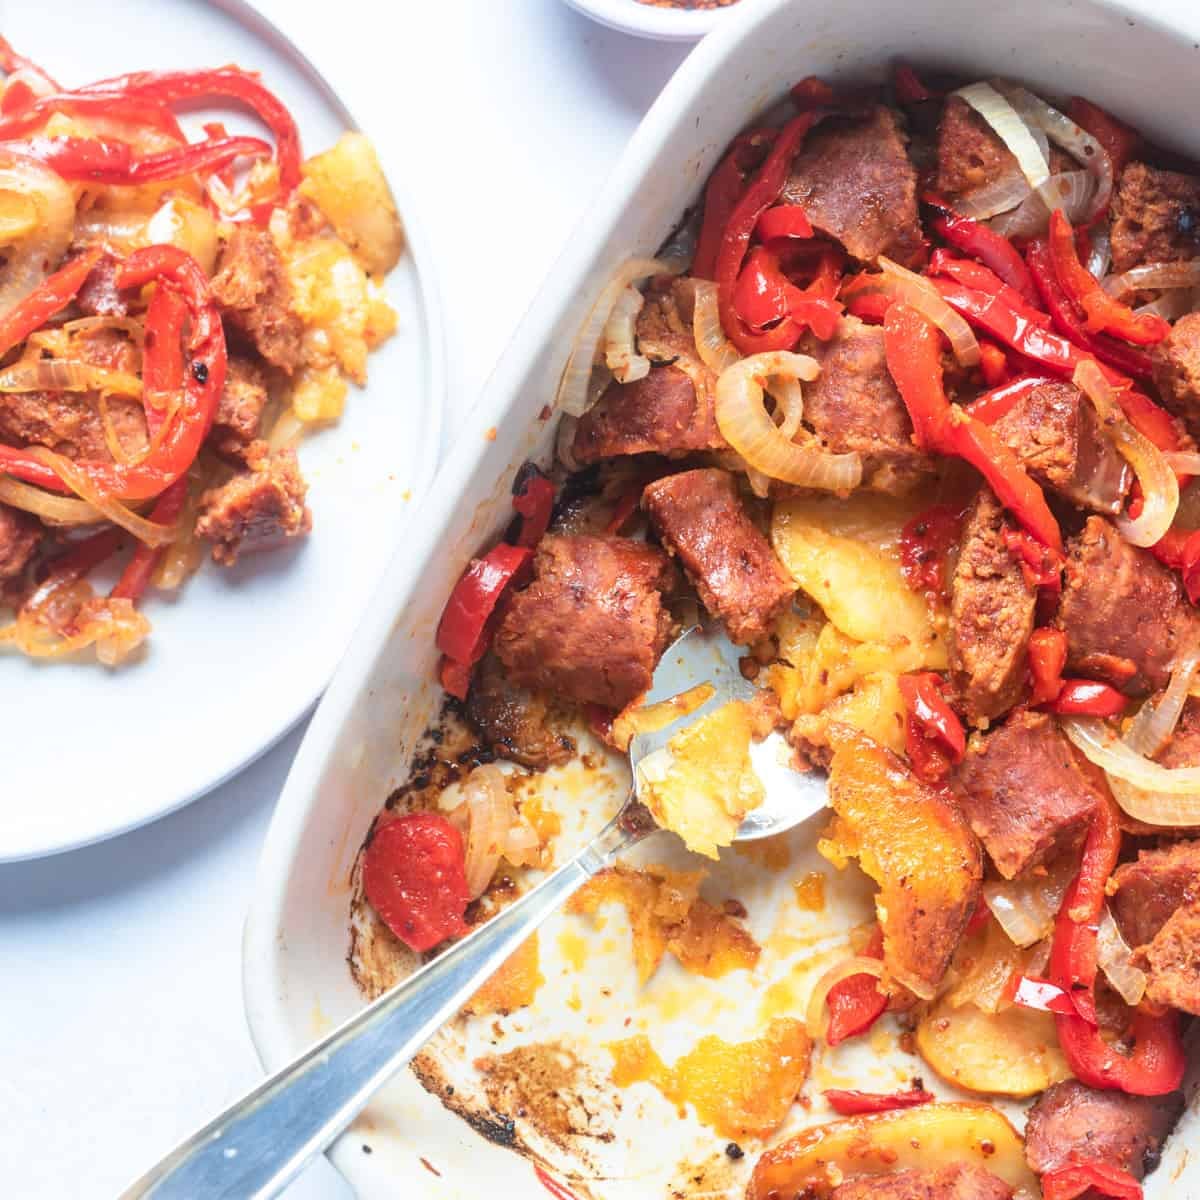 Potato and sausage casserole with serving spoon in a baking dish.